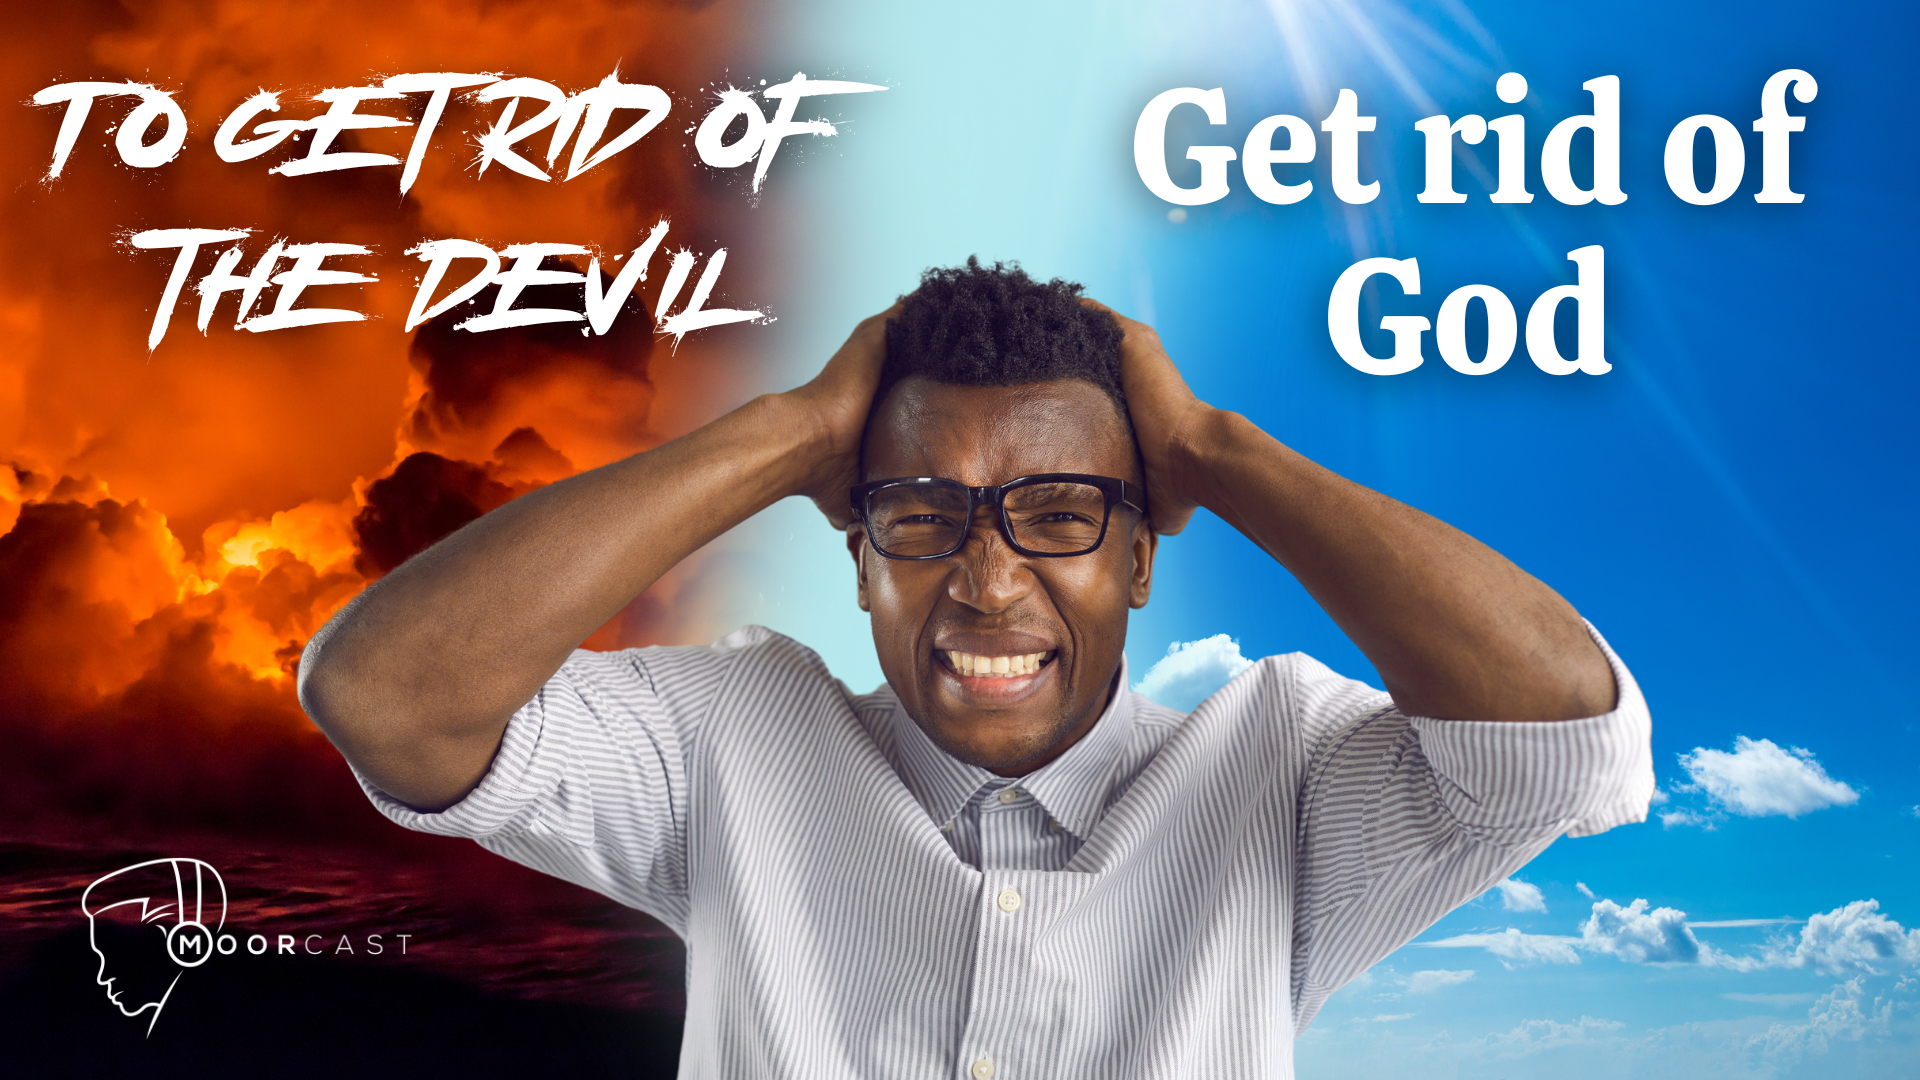 To Get Rid Of The Devil, Get Rid Of God